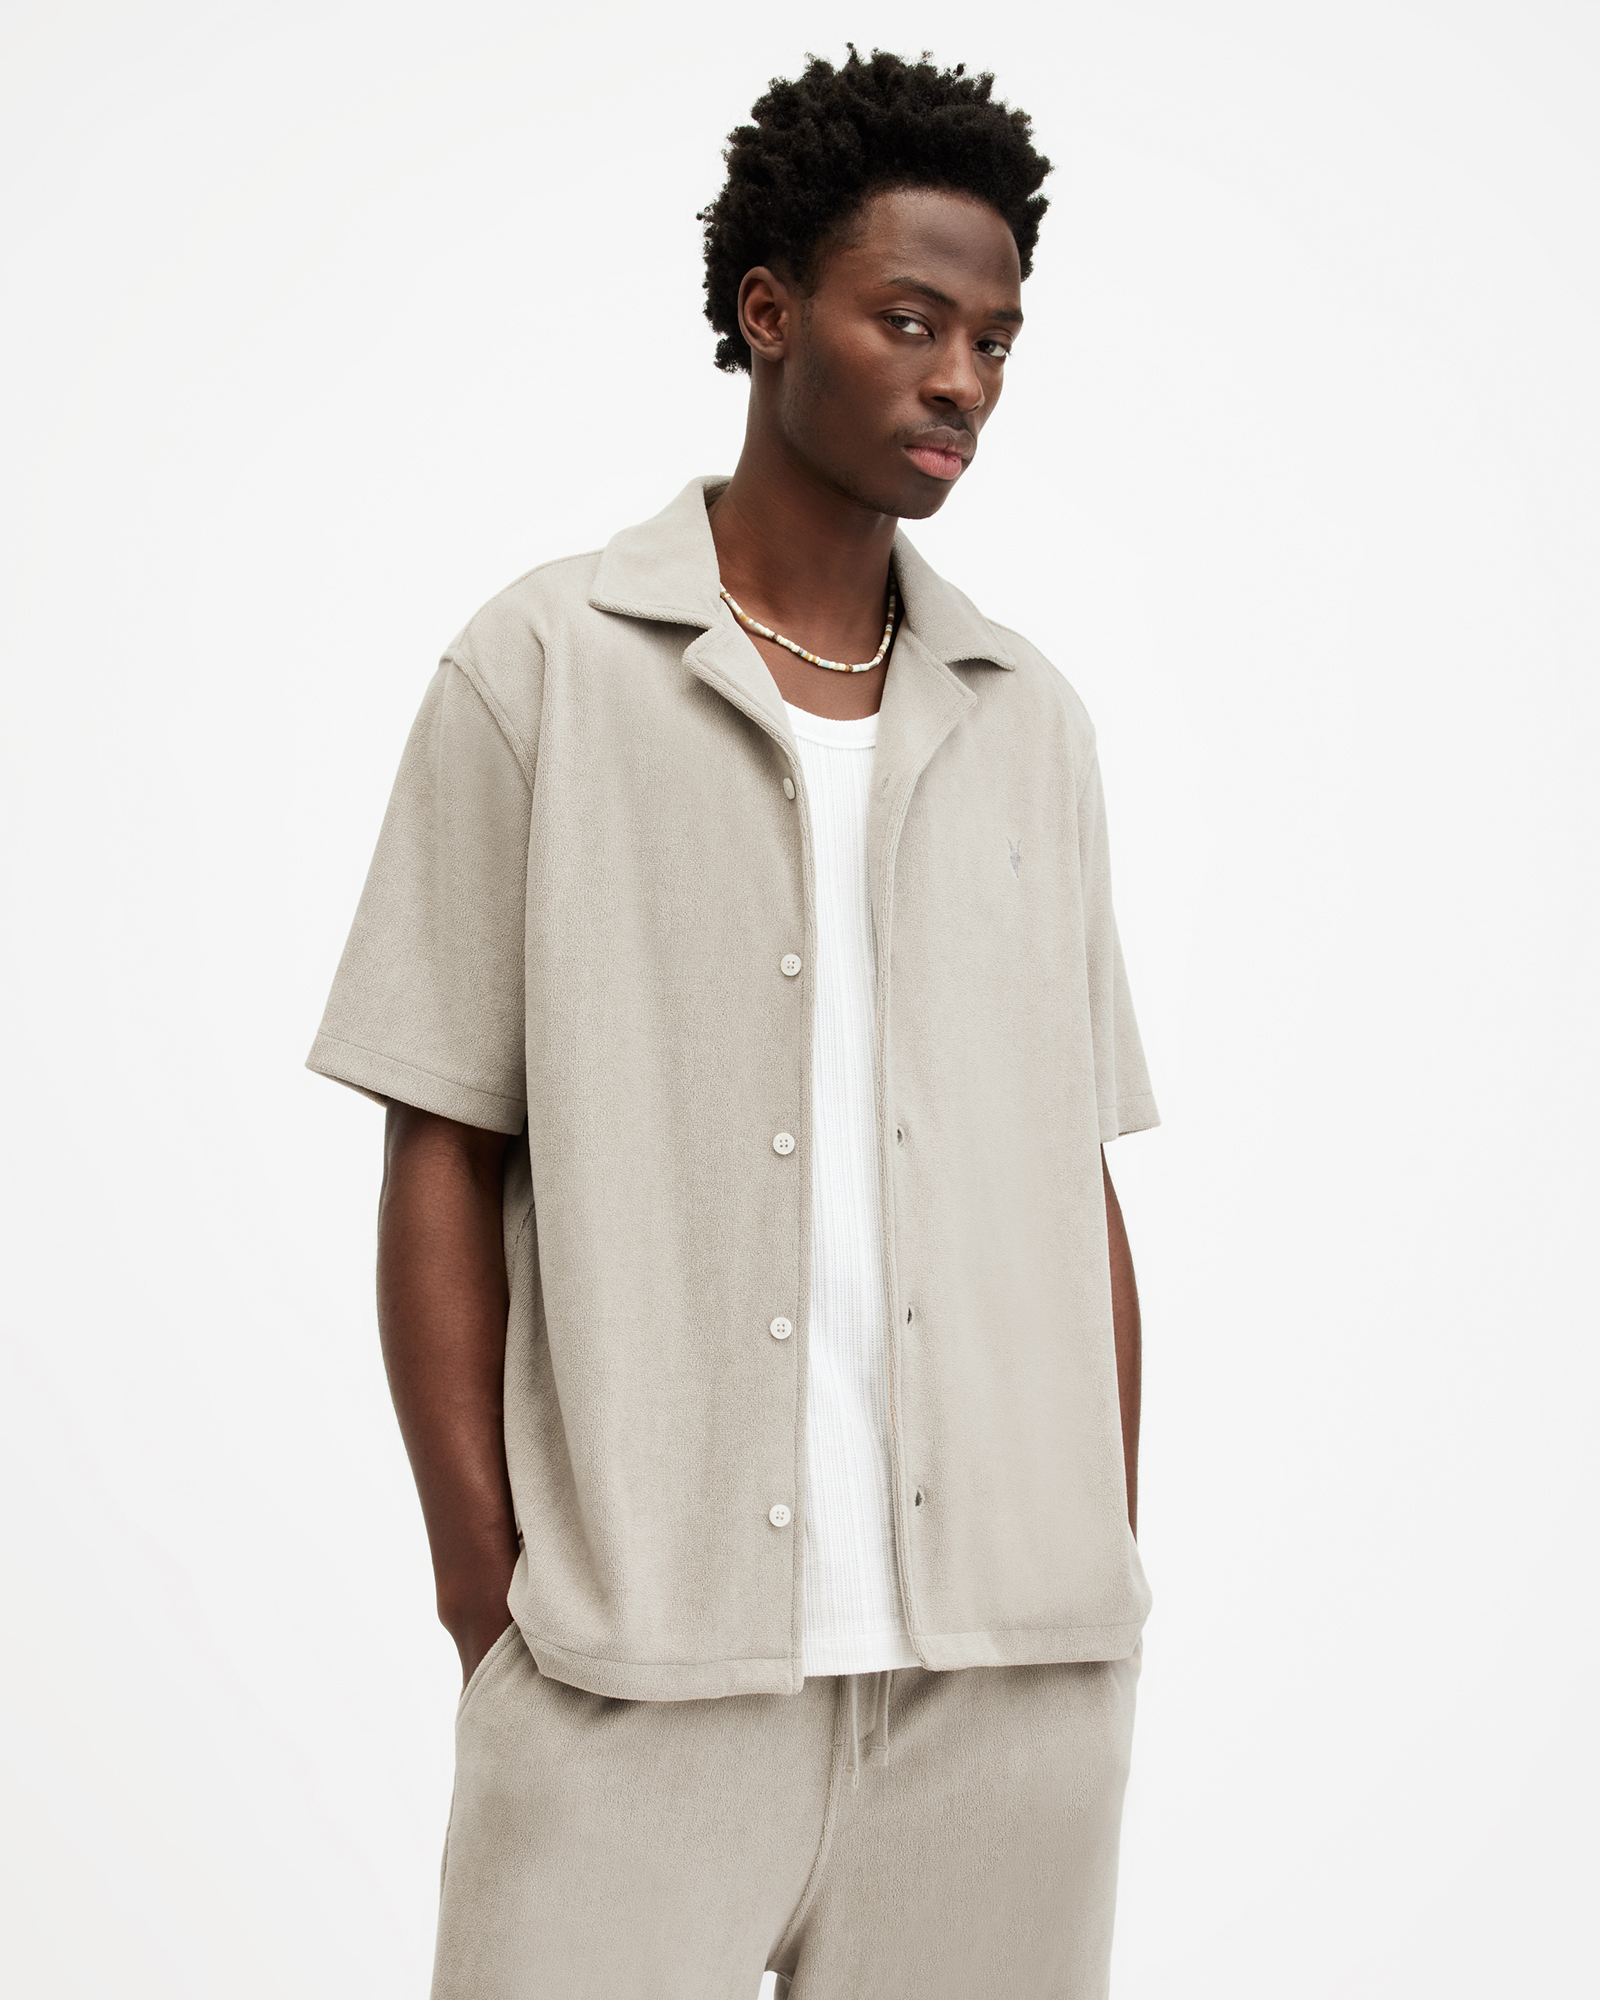 AllSaints Felix Relaxed Fit Towel Shirt,, Stone Taupe